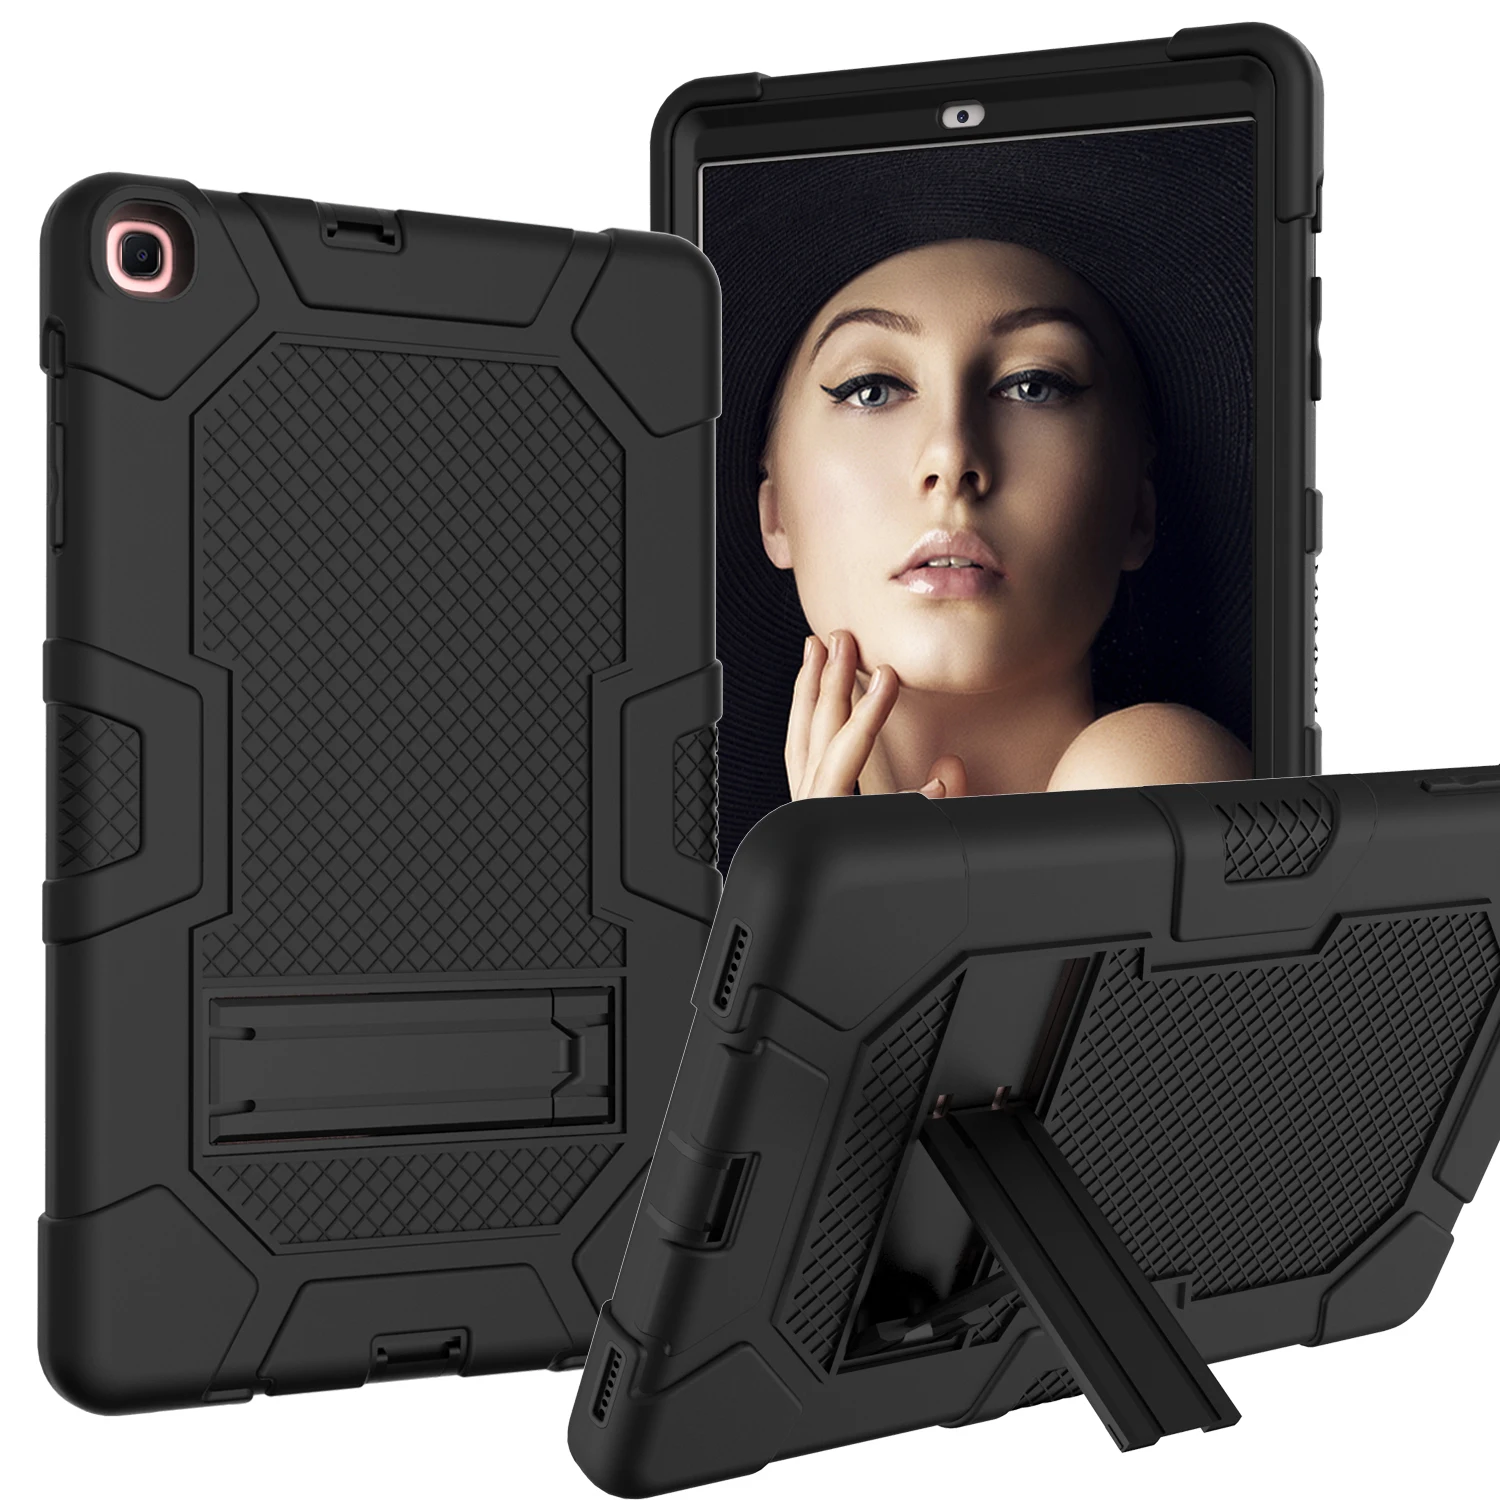 

Heavy Duty Case For Samsung Galaxy Tab A 10.1 Inch T510 /T515 Rugged Tough Armor Defender Shockproof Kickstand Tablet Cover